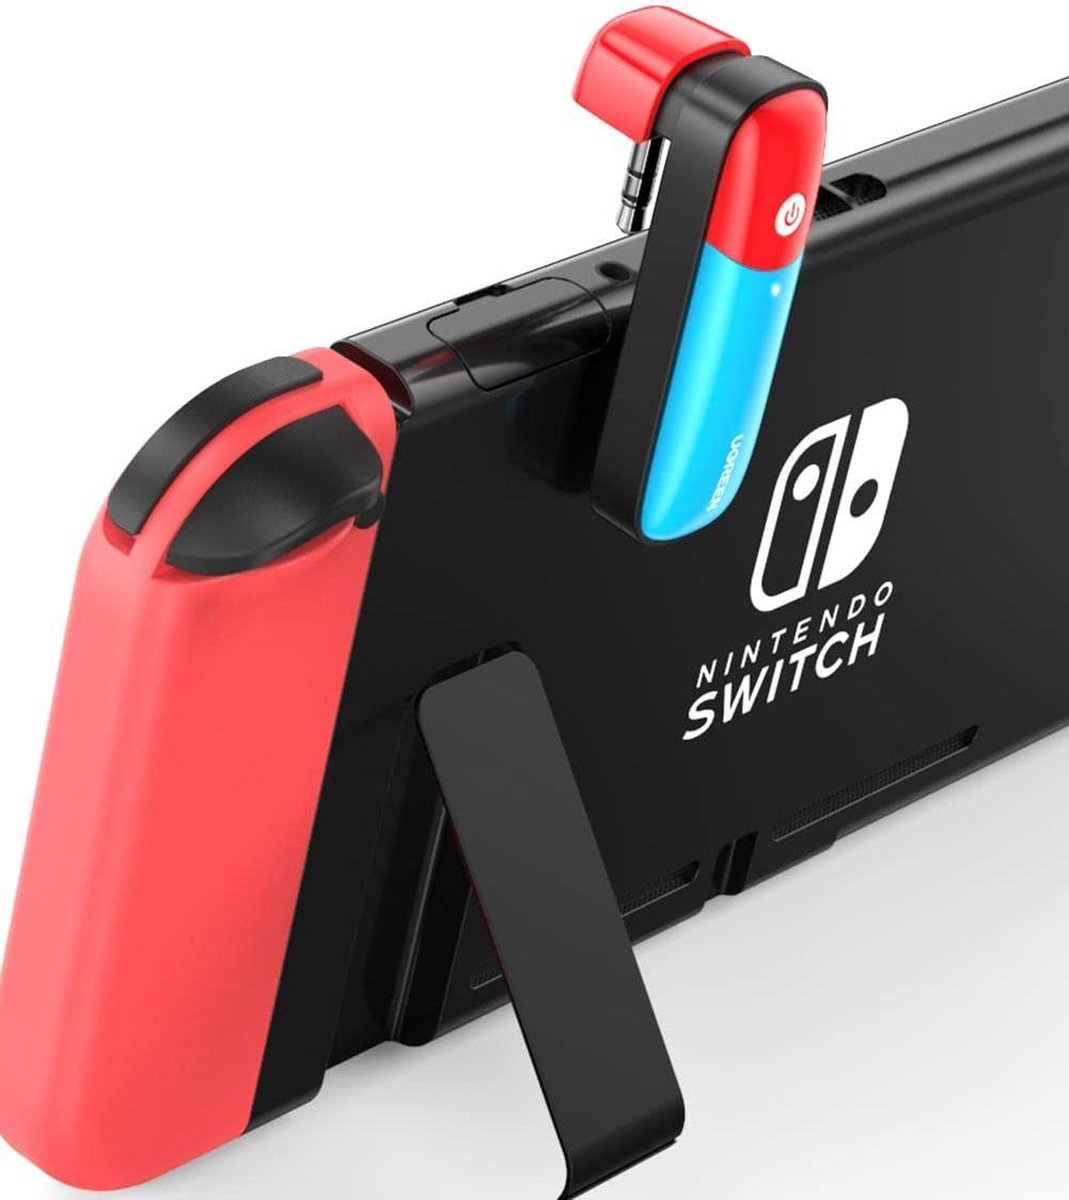 Bluetooth adapter/dongle 5.0 - Nintendo Switch - 2 Screen Protectors - Ugreen